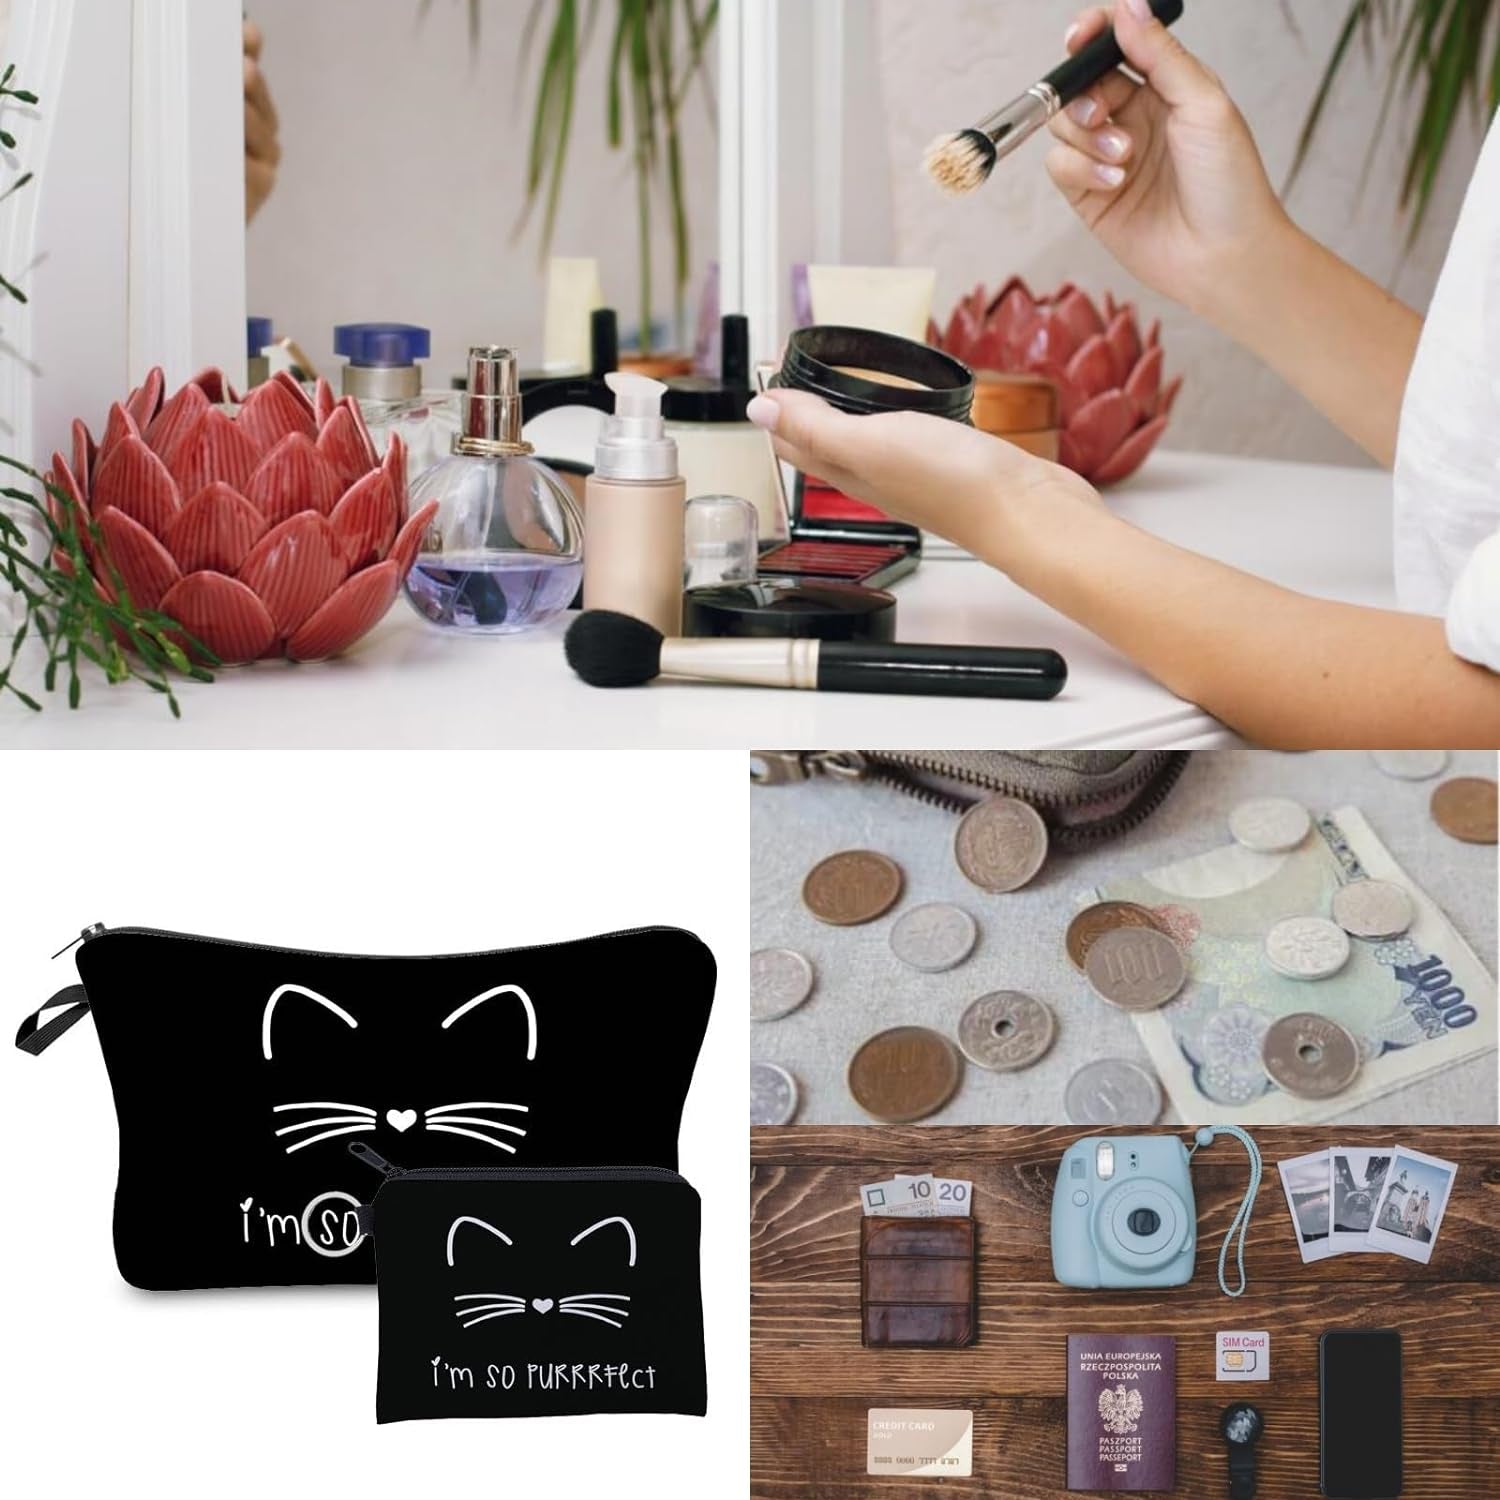 Toiletry Bag 2 Pcs Small Makeup Bags for Handbag Black Cute Cosmetic Bags with Coin Bags Portable Pencil Case for Storage Pouch Beauty Bag for Women Wash Bags, 0201